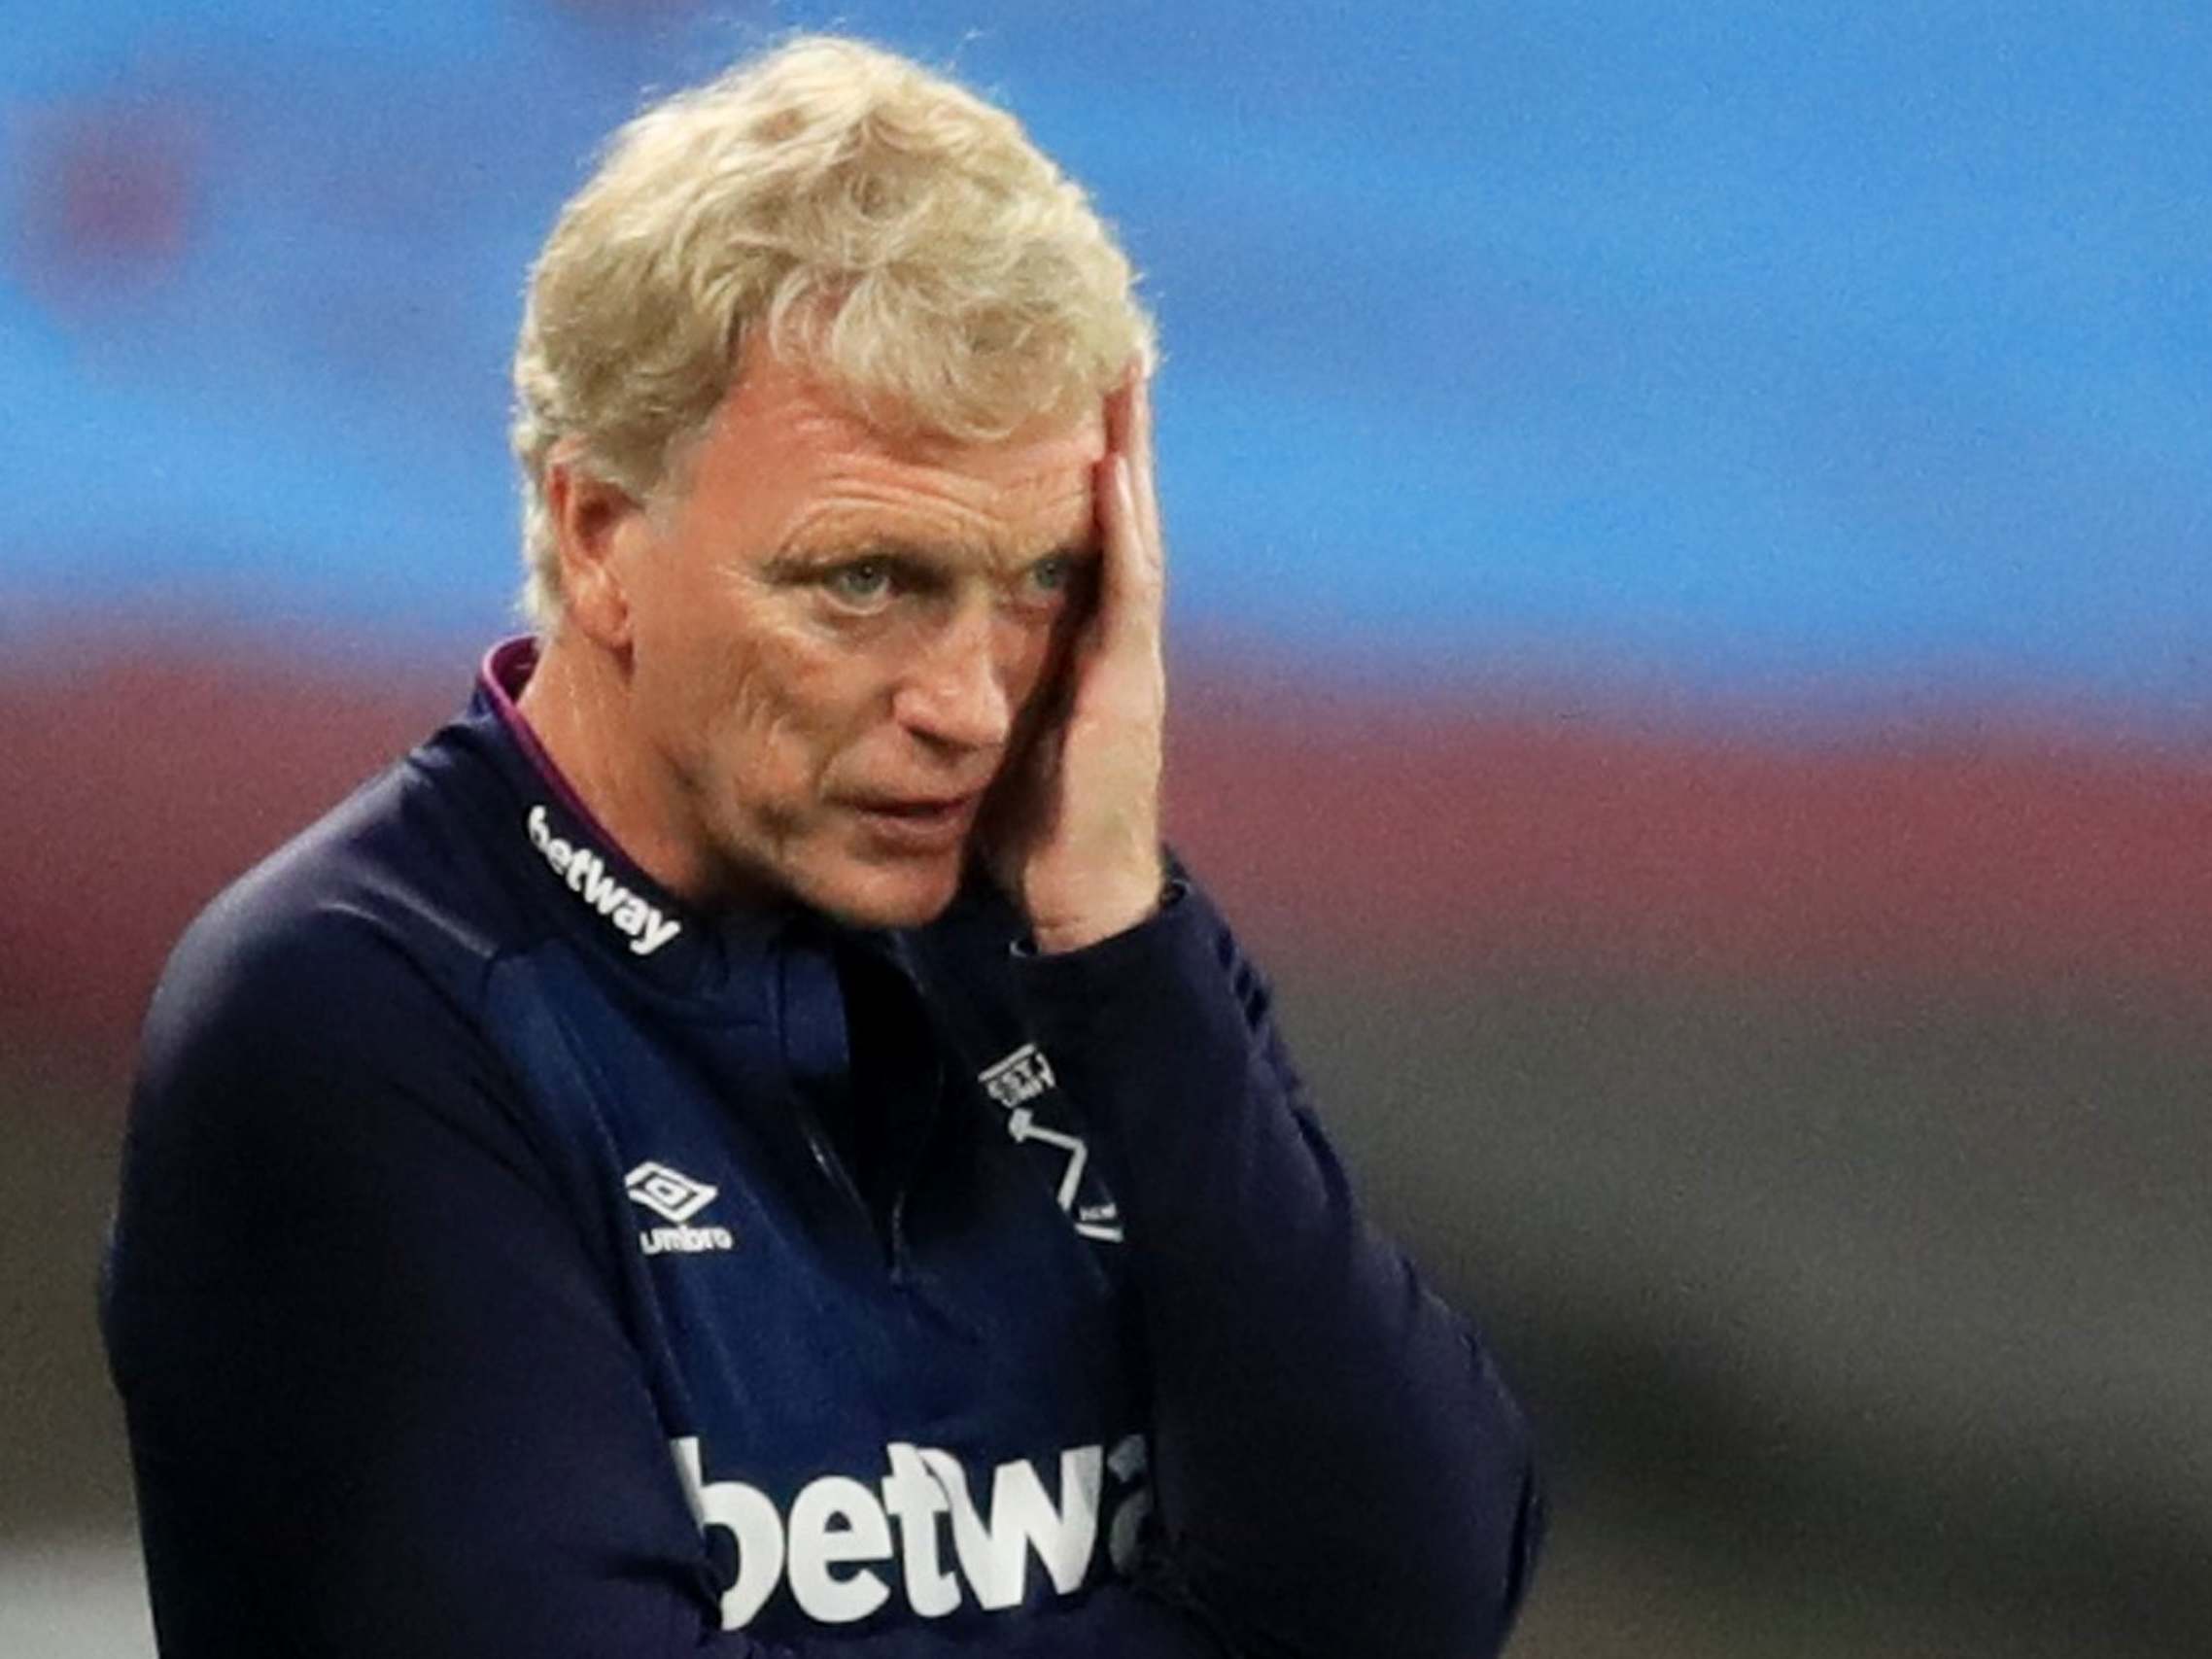 David Moyes was unhappy with another VAR decision that went against West Ham